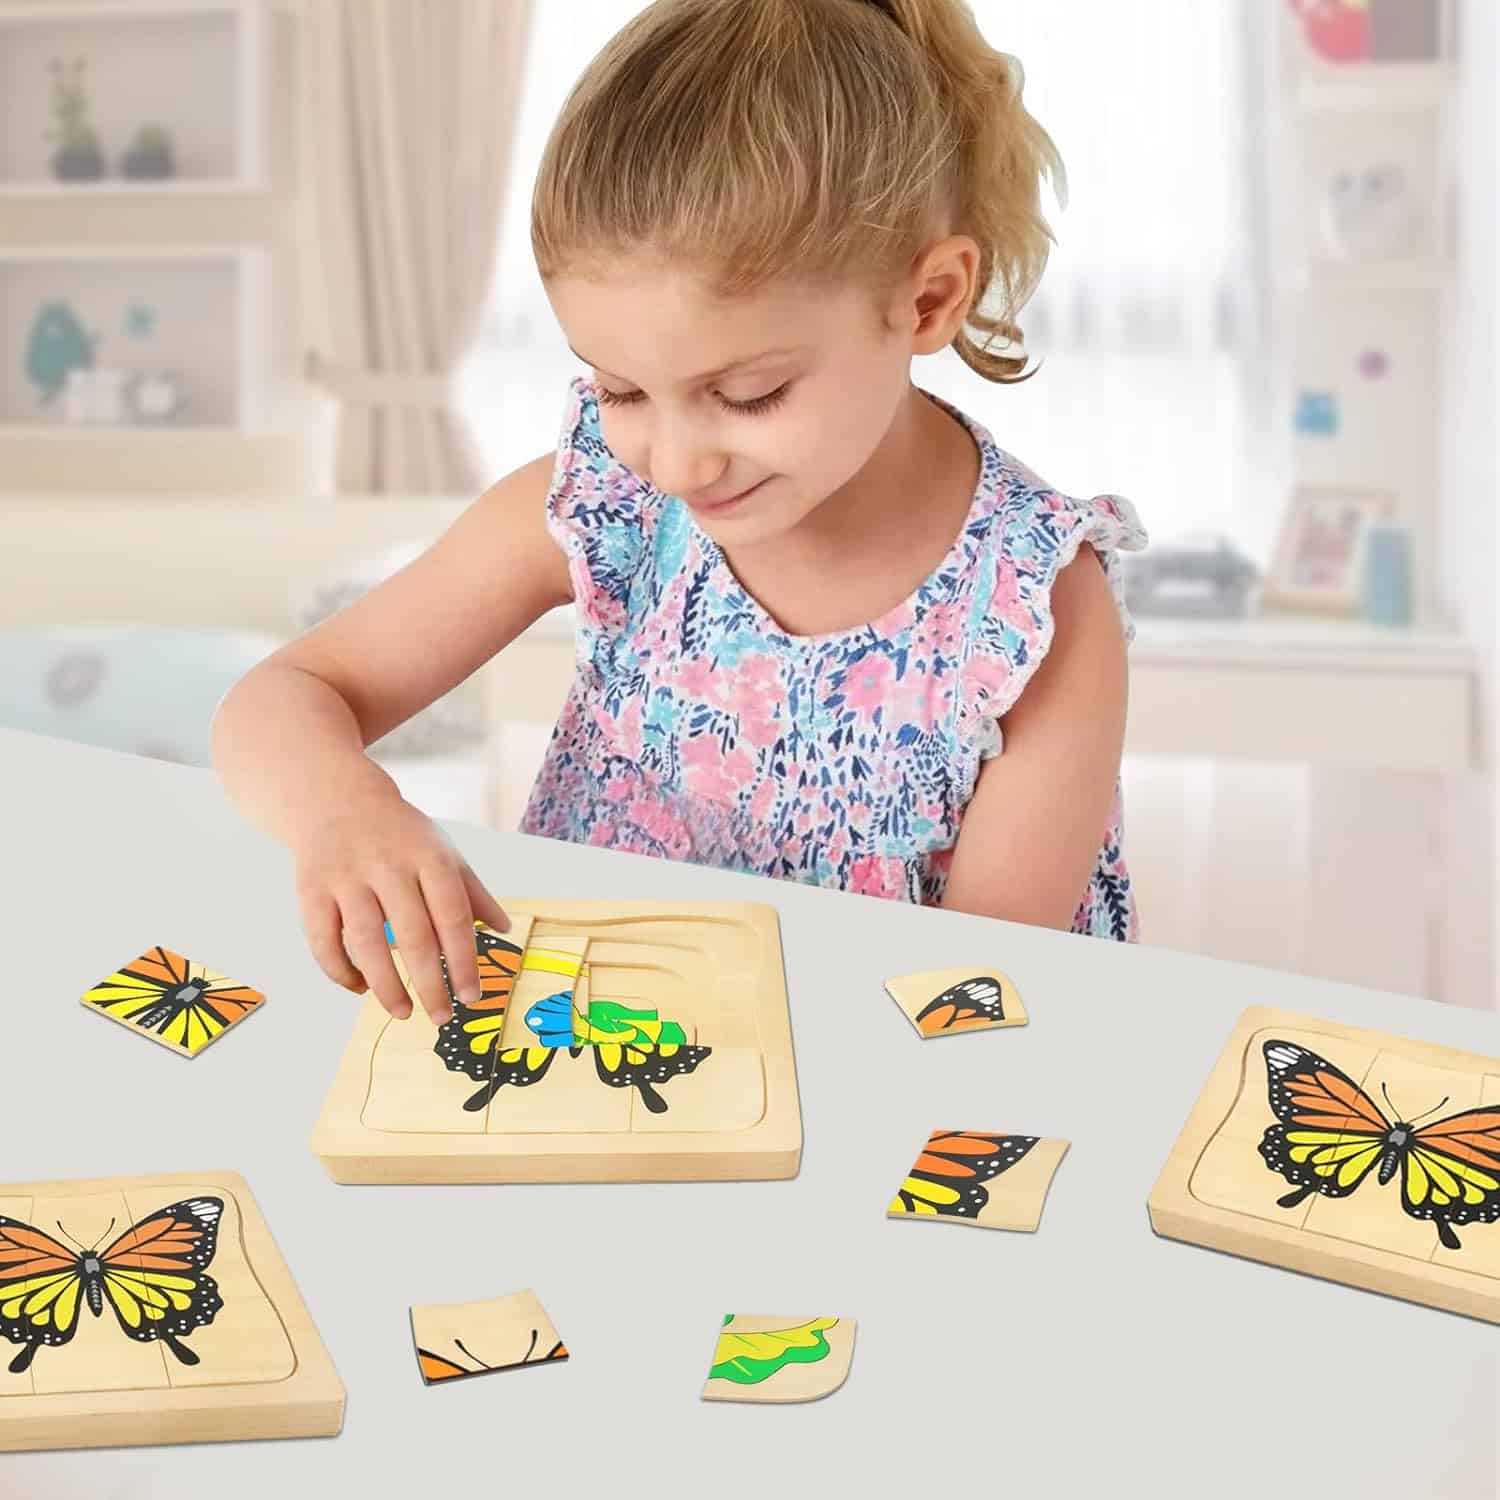 Montessori Wooden Puzzles for Kids Ages 4-8: A Review